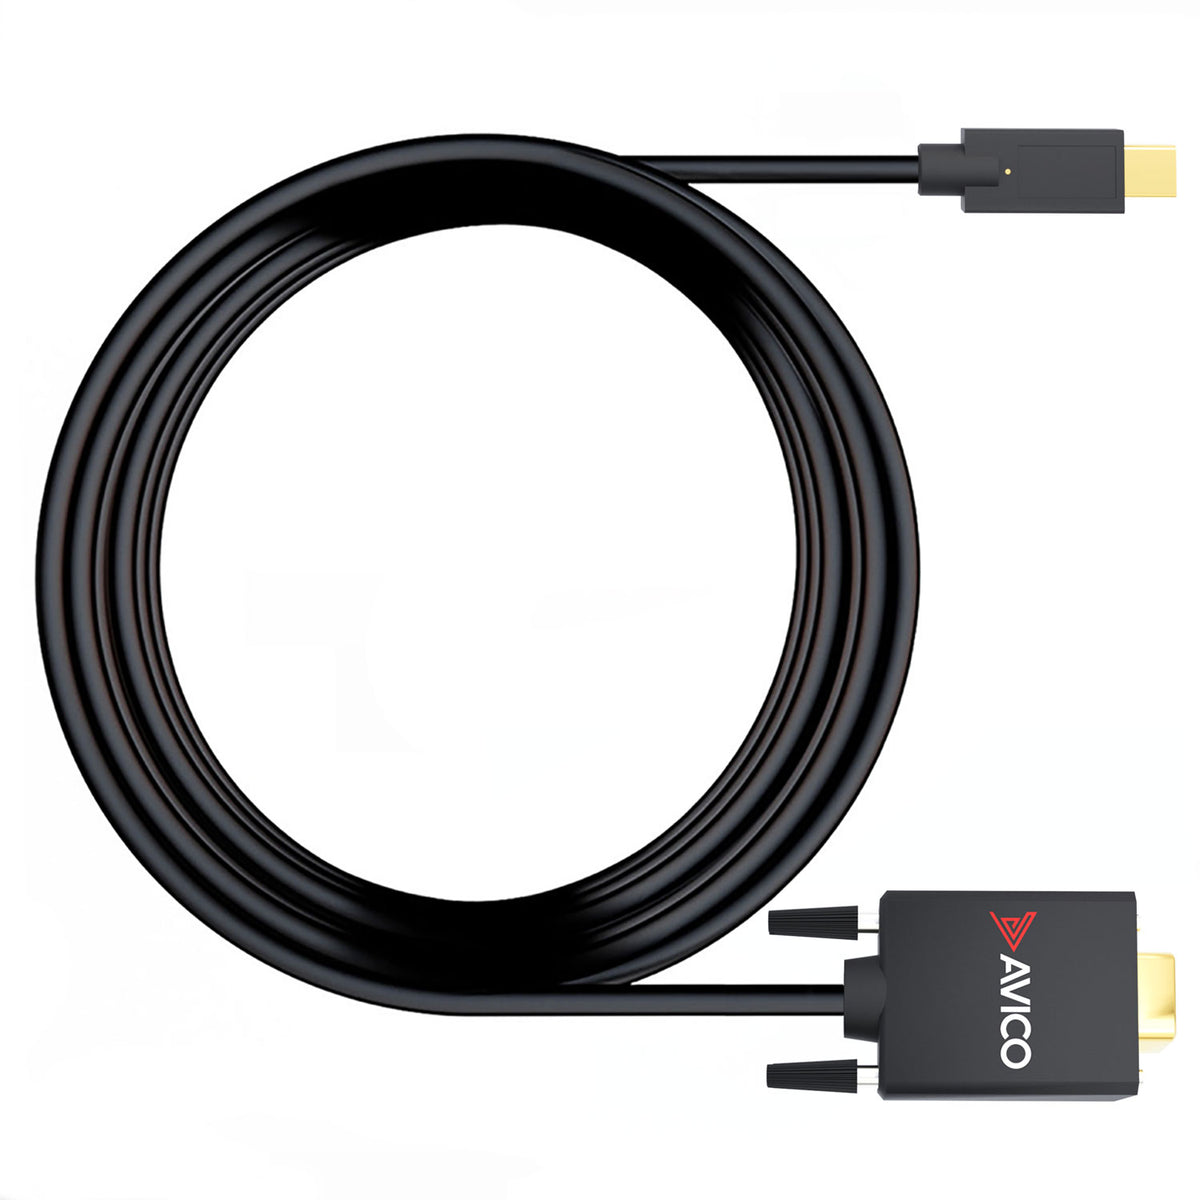 Plugable USB C to VGA Cable 6 Feet - Driverless Connect Your USB-C or  Thunderbolt 3 Laptop to VGA Displays 1920x1080@60Hz (Compatible with  2018/2019 MacBook Pros, Dell XPS 13/15, Surface Book 2), 1.8m : Electronics  